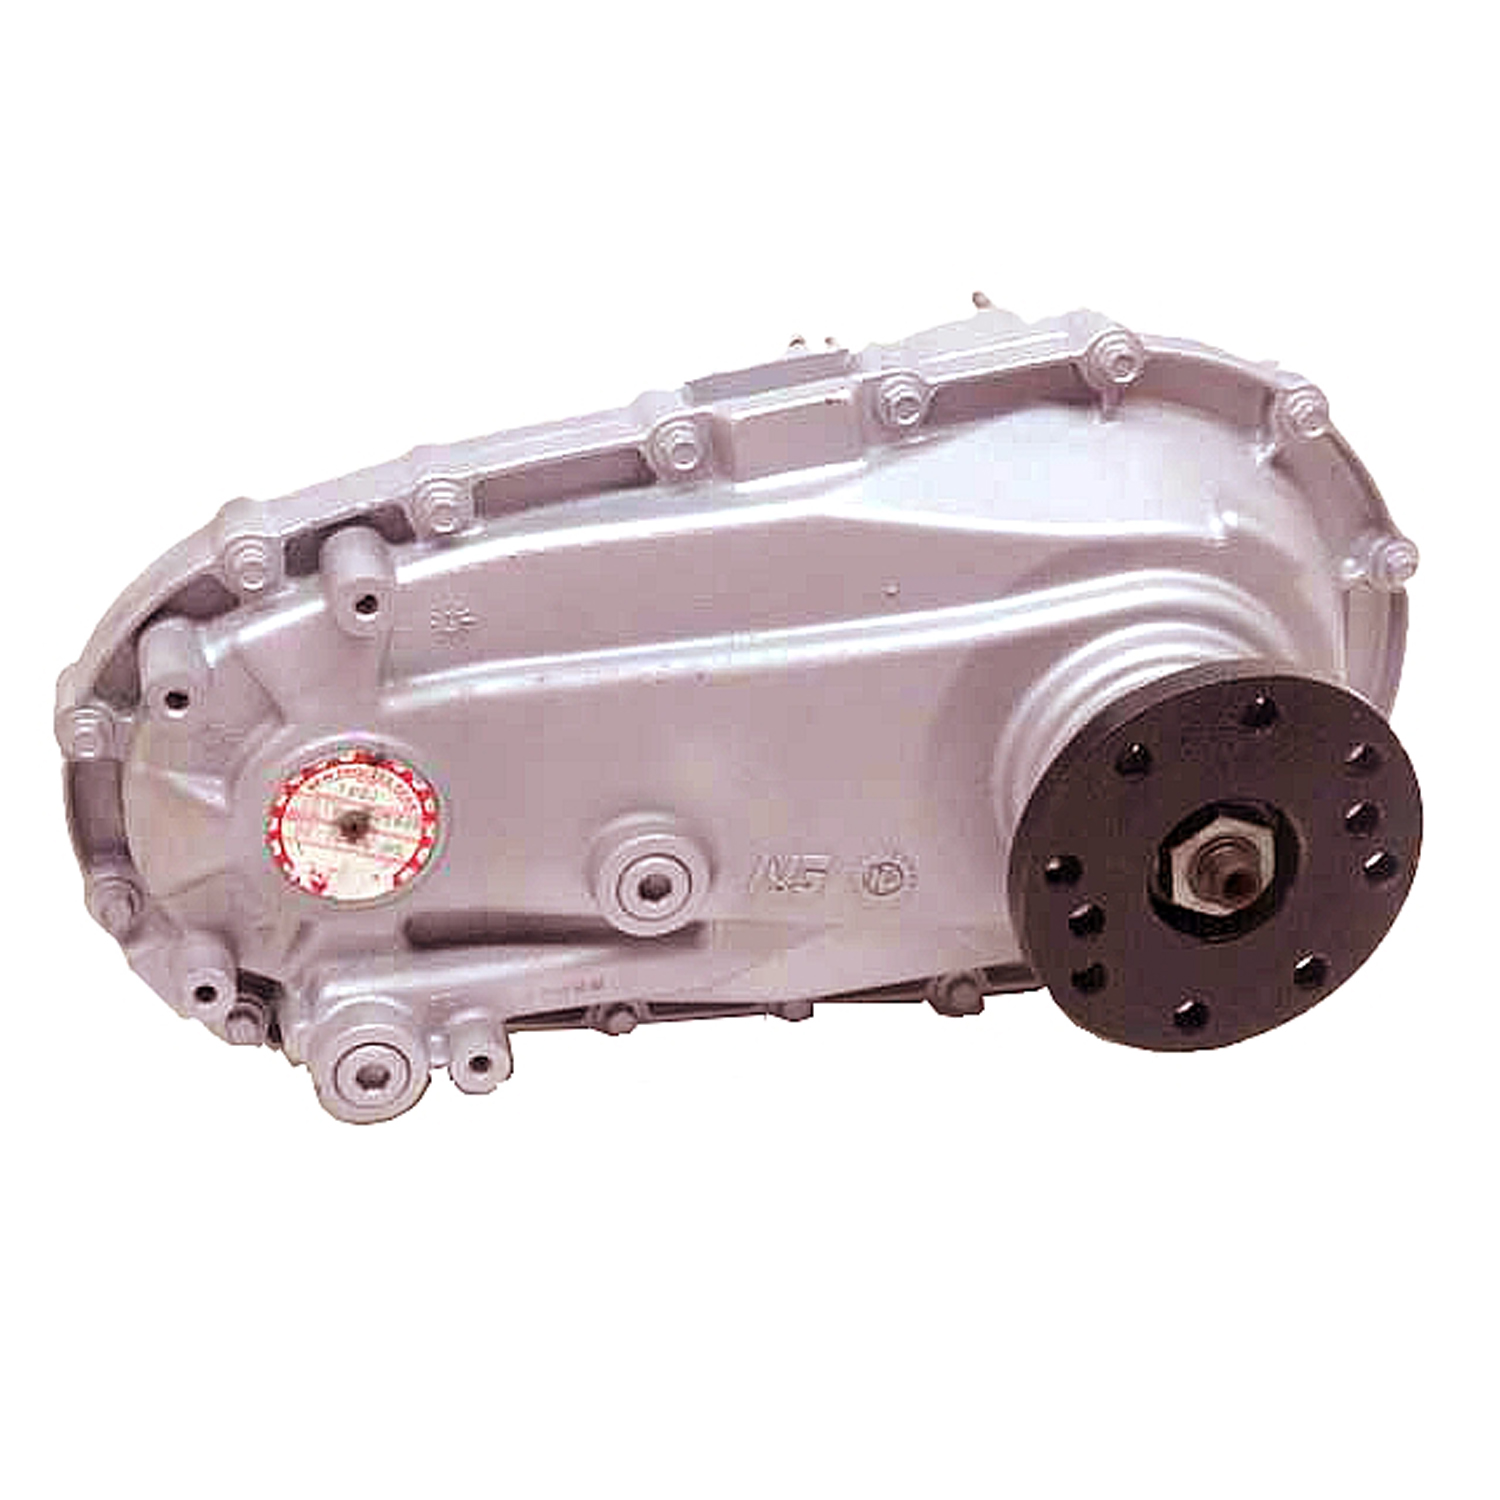 Remanufactured NV140 Transfer Case for Jeep 05-09 Grand Cherokee & Comm&er